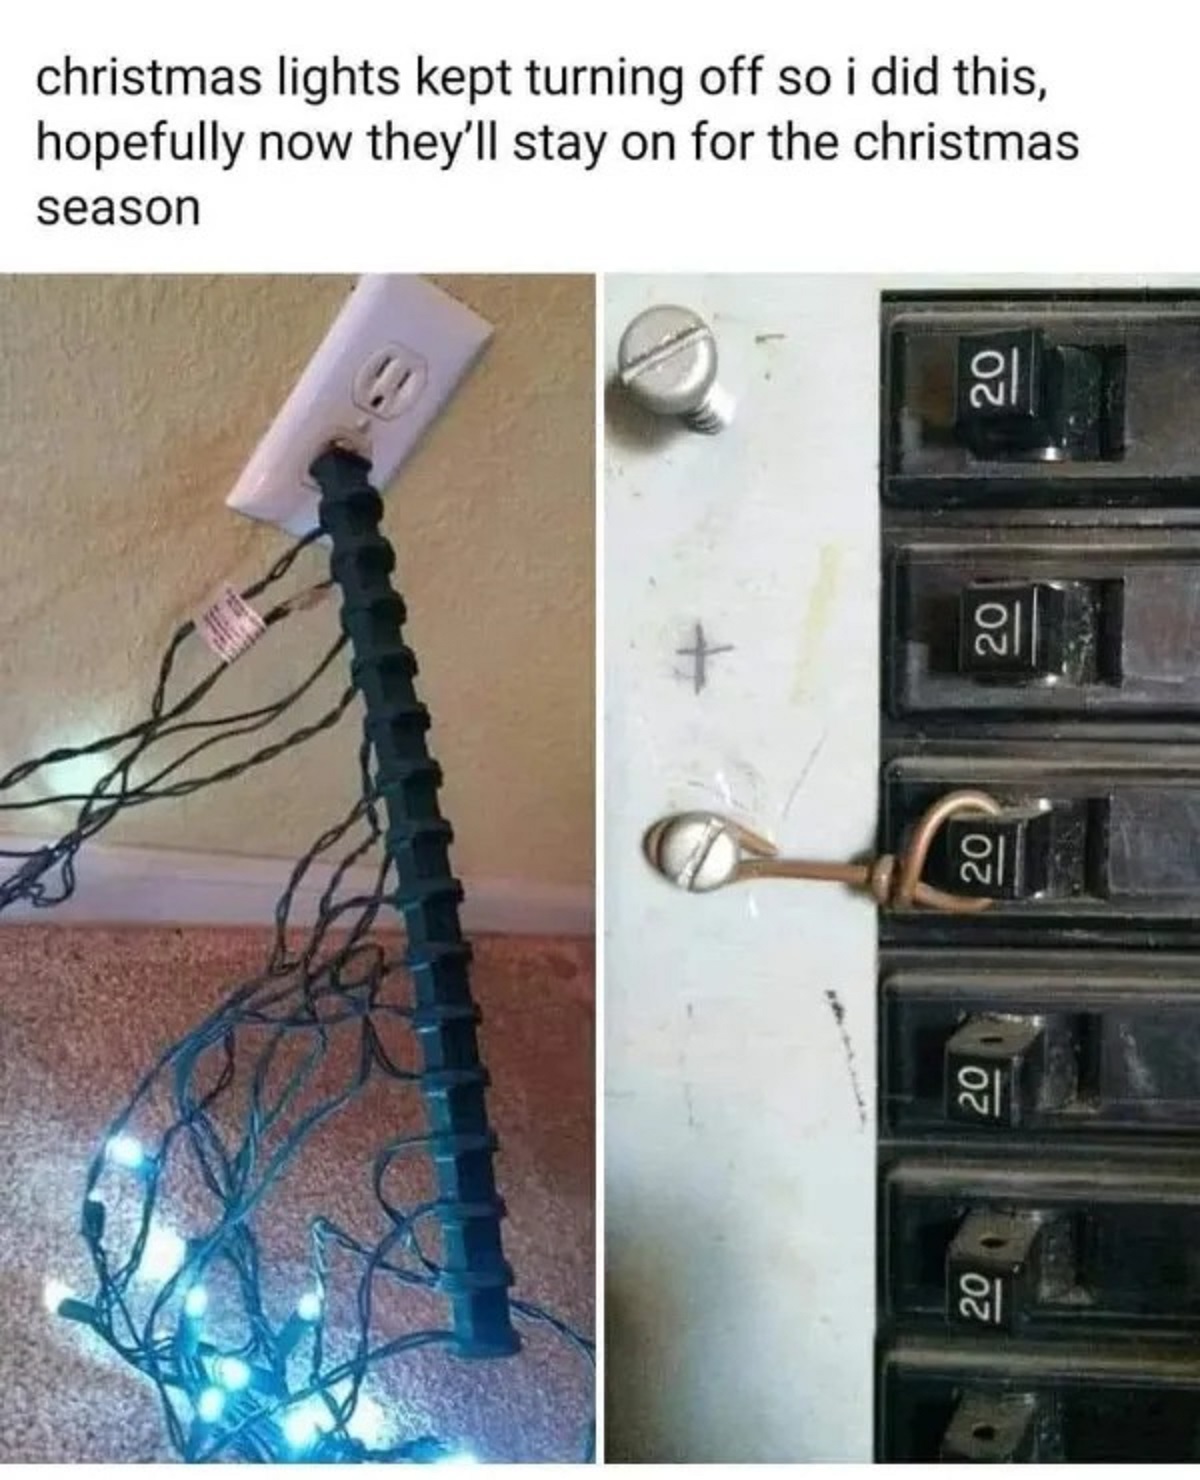 christmas lights kept turning off so i did this - christmas lights kept turning off so i did this, hopefully now they'll stay on for the christmas season 20 20 20 20 20